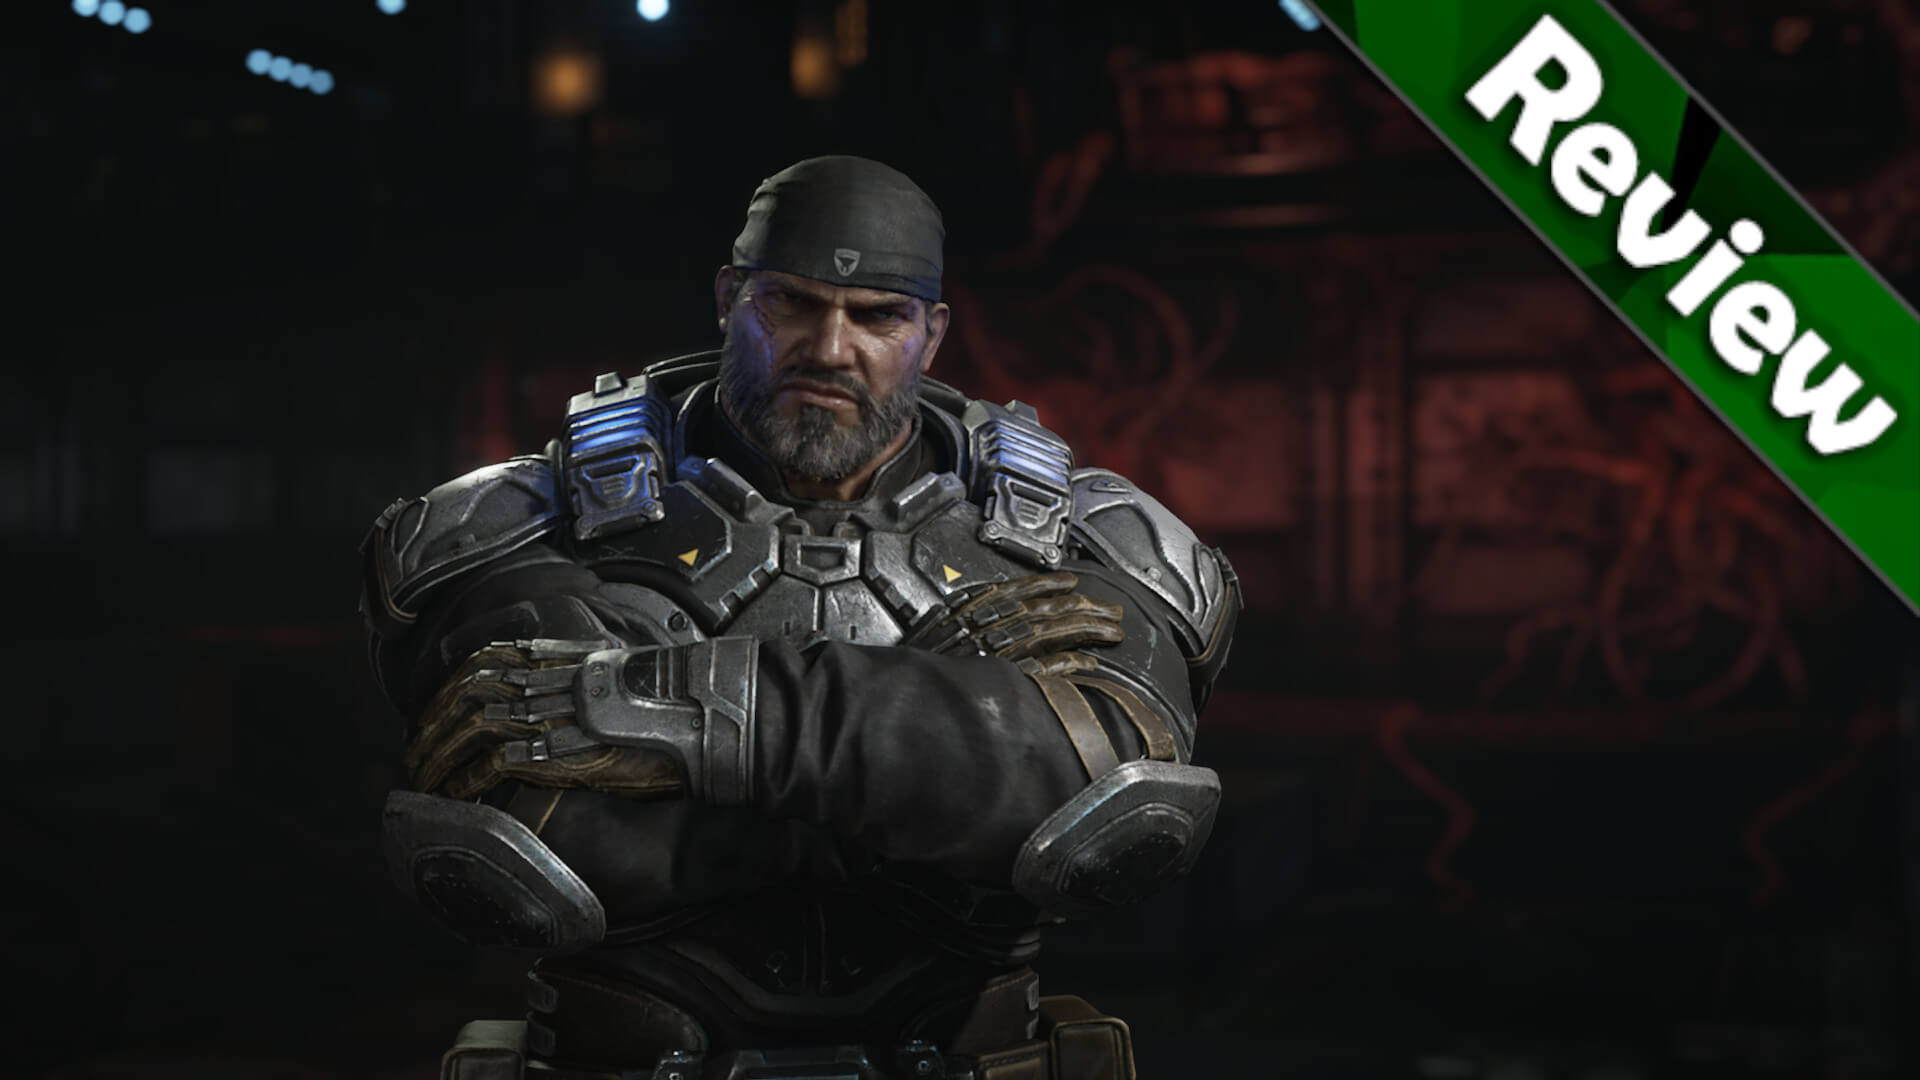 Gears 5 Multiplayer Review 